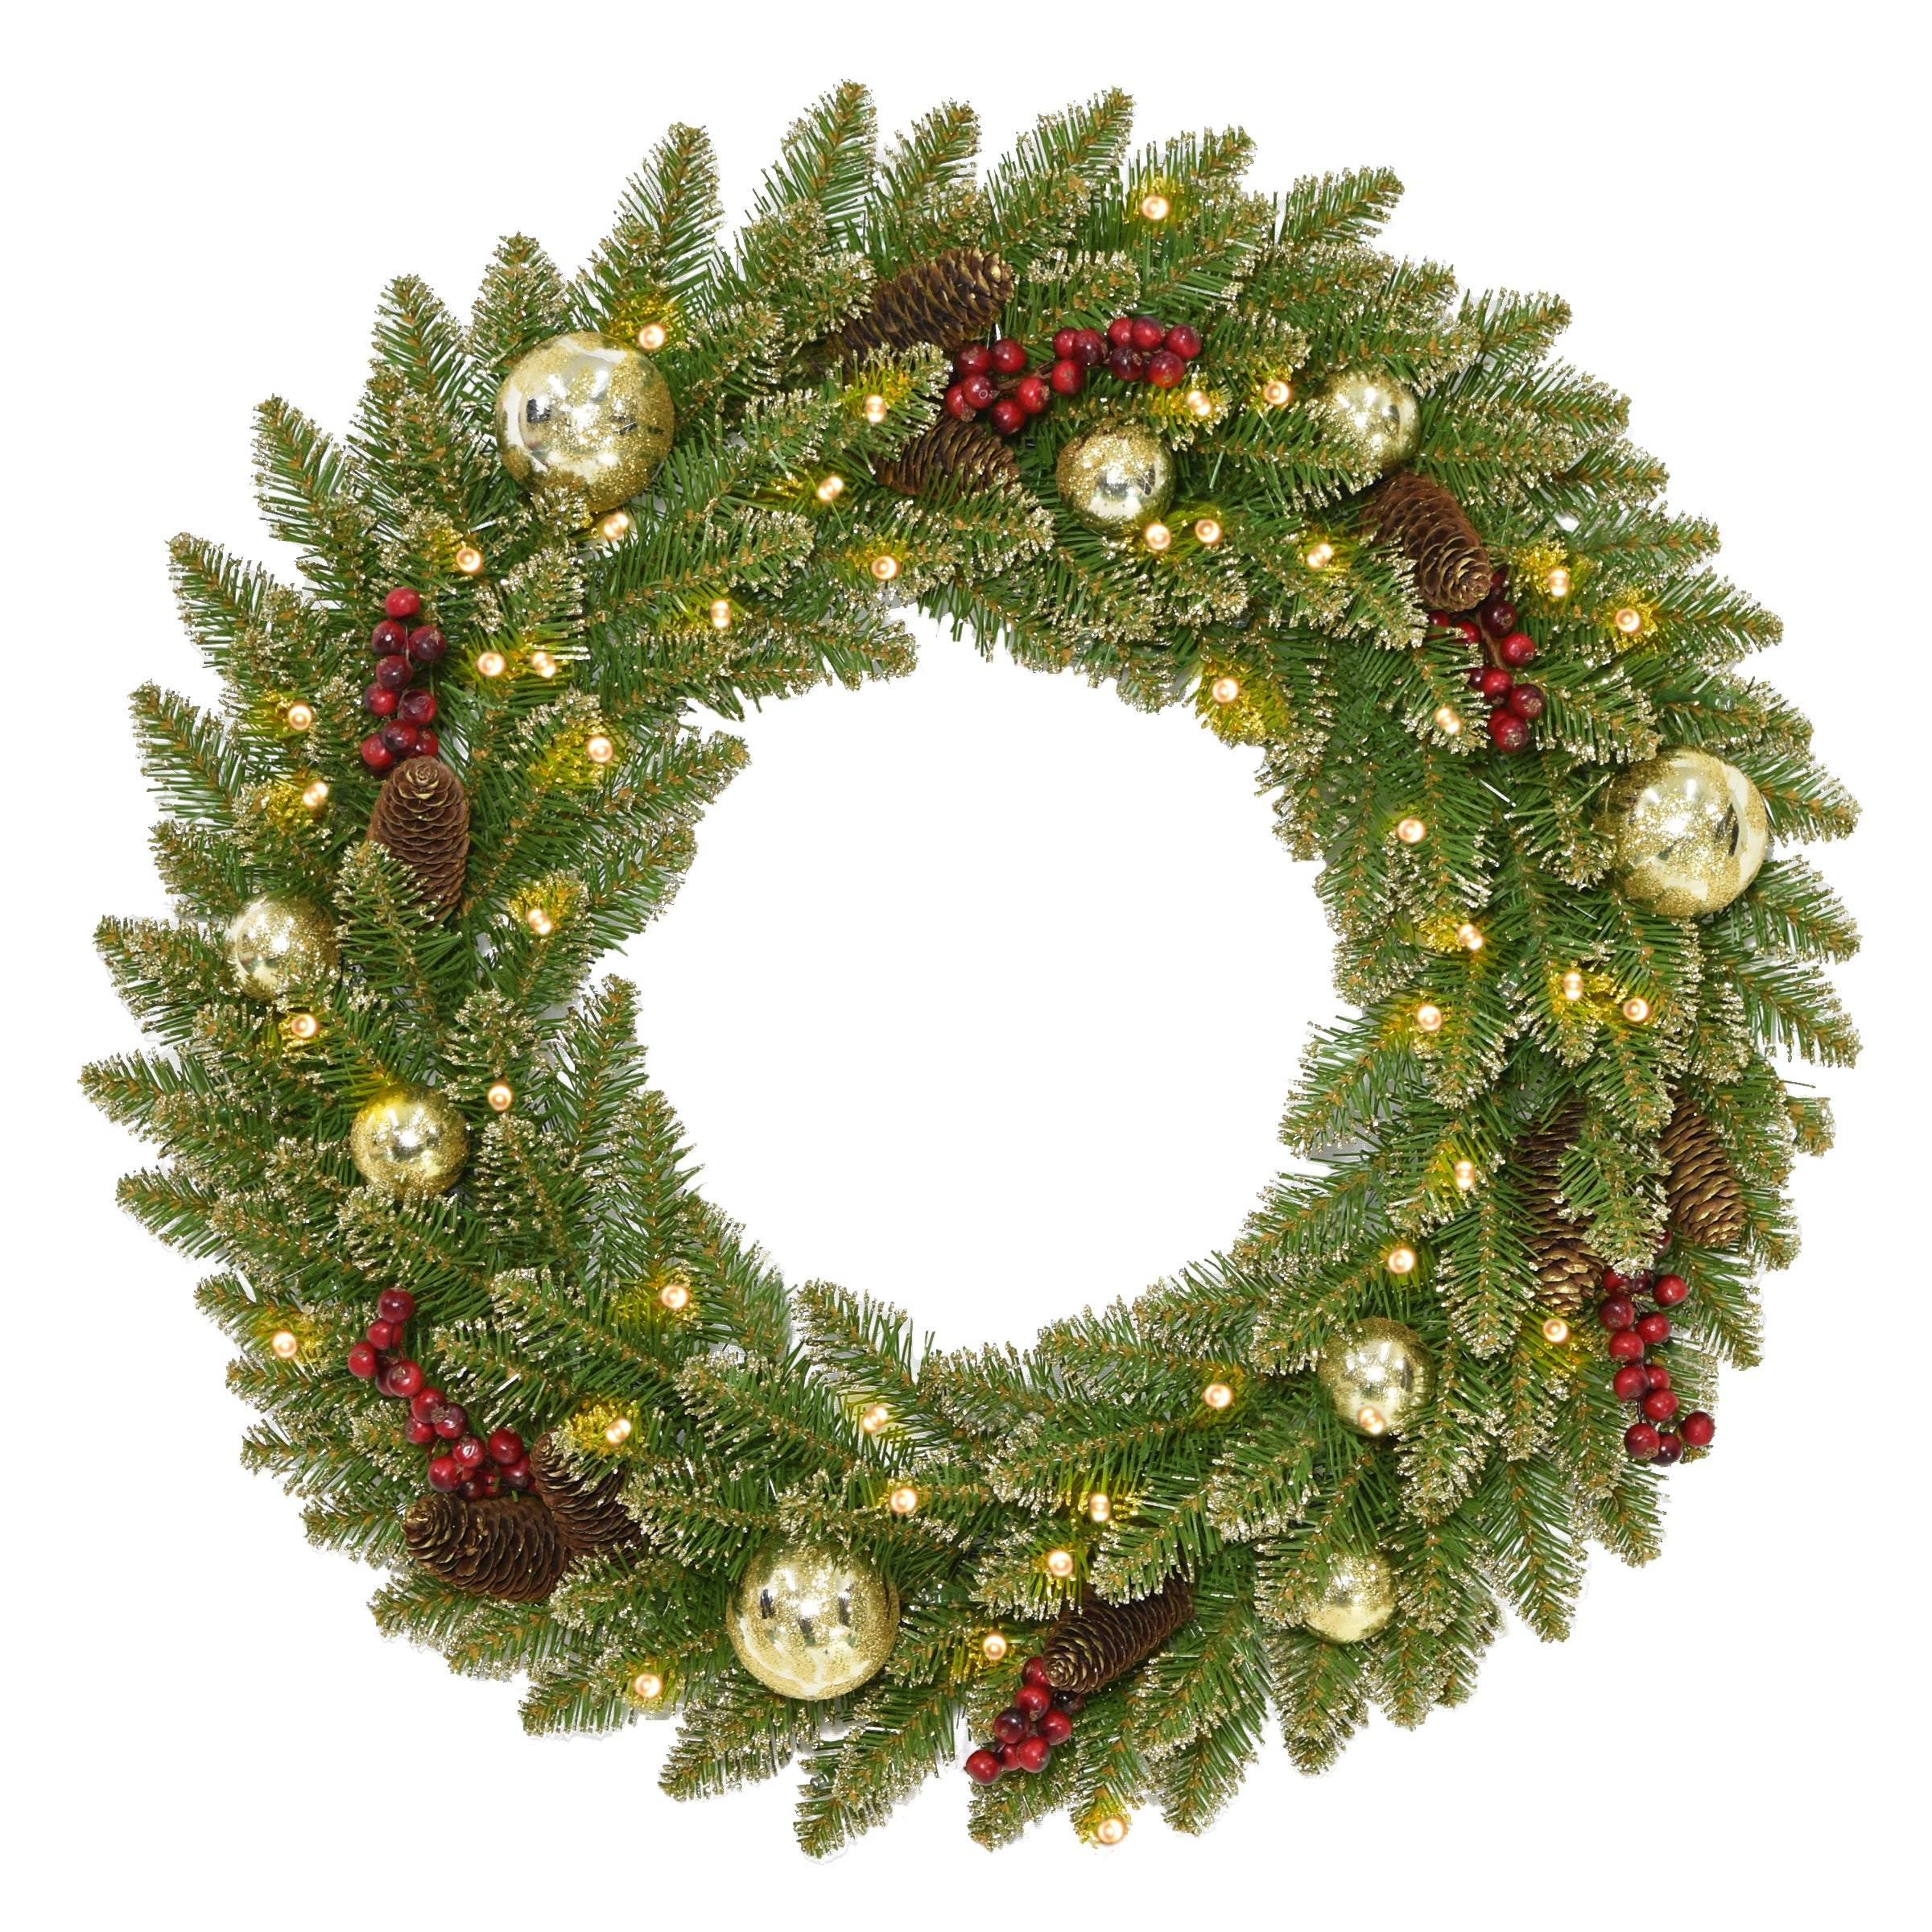 National Tree Dugl3-300-24wb1 24" Glittery Gold Dunhill Fir Wreath With Red Berries, Cones, Gold Ornaments & 35 Warm White Battery Operated Led Lights